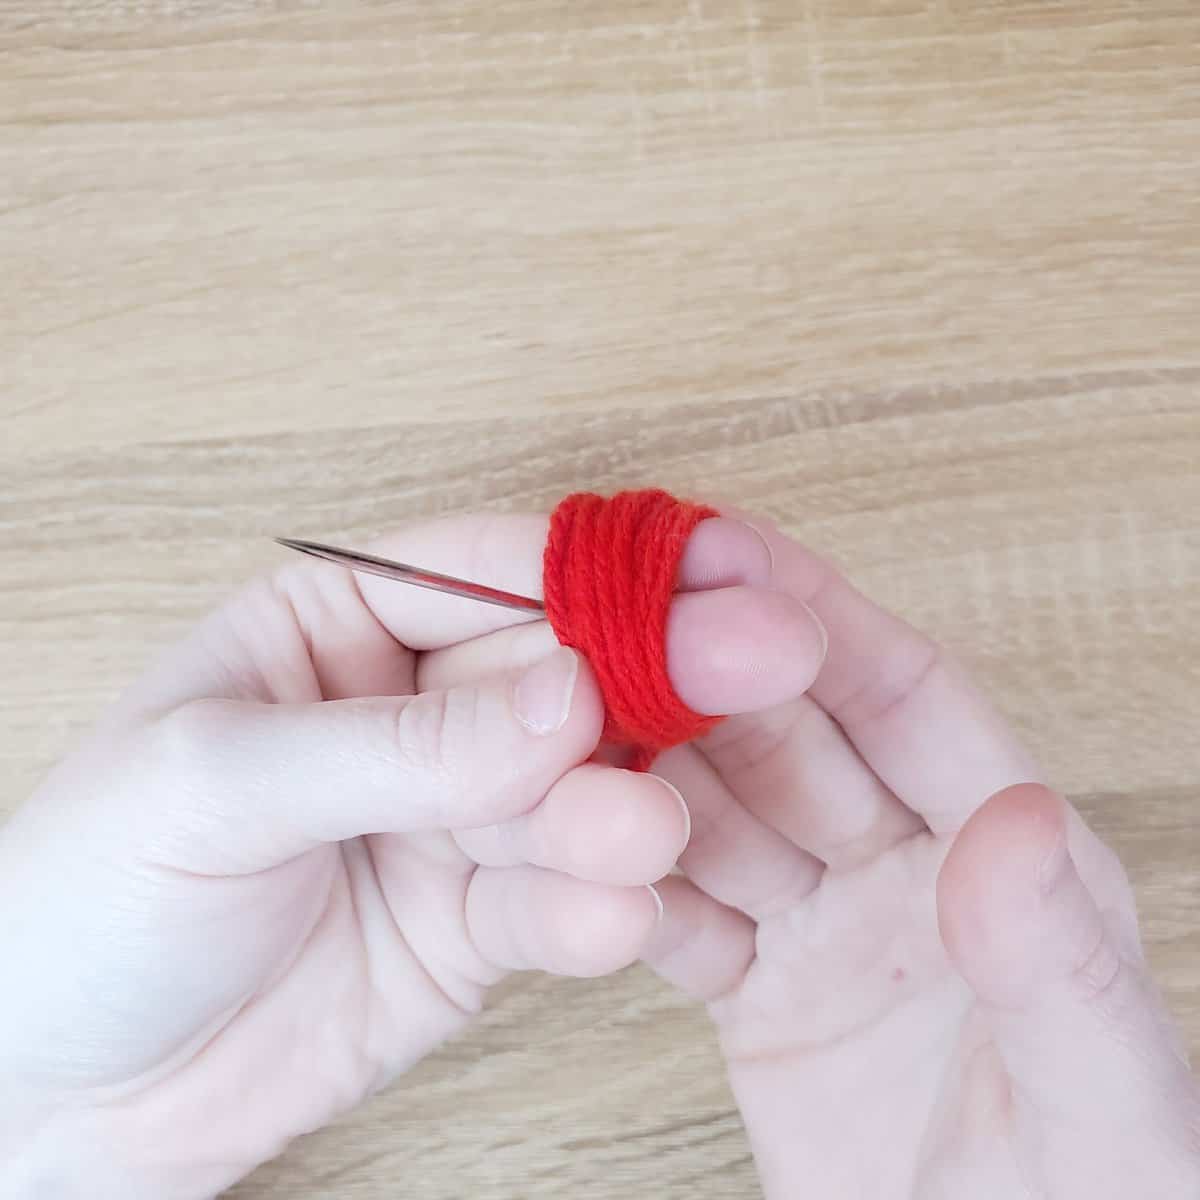 sending the yarn between the index and middle finger